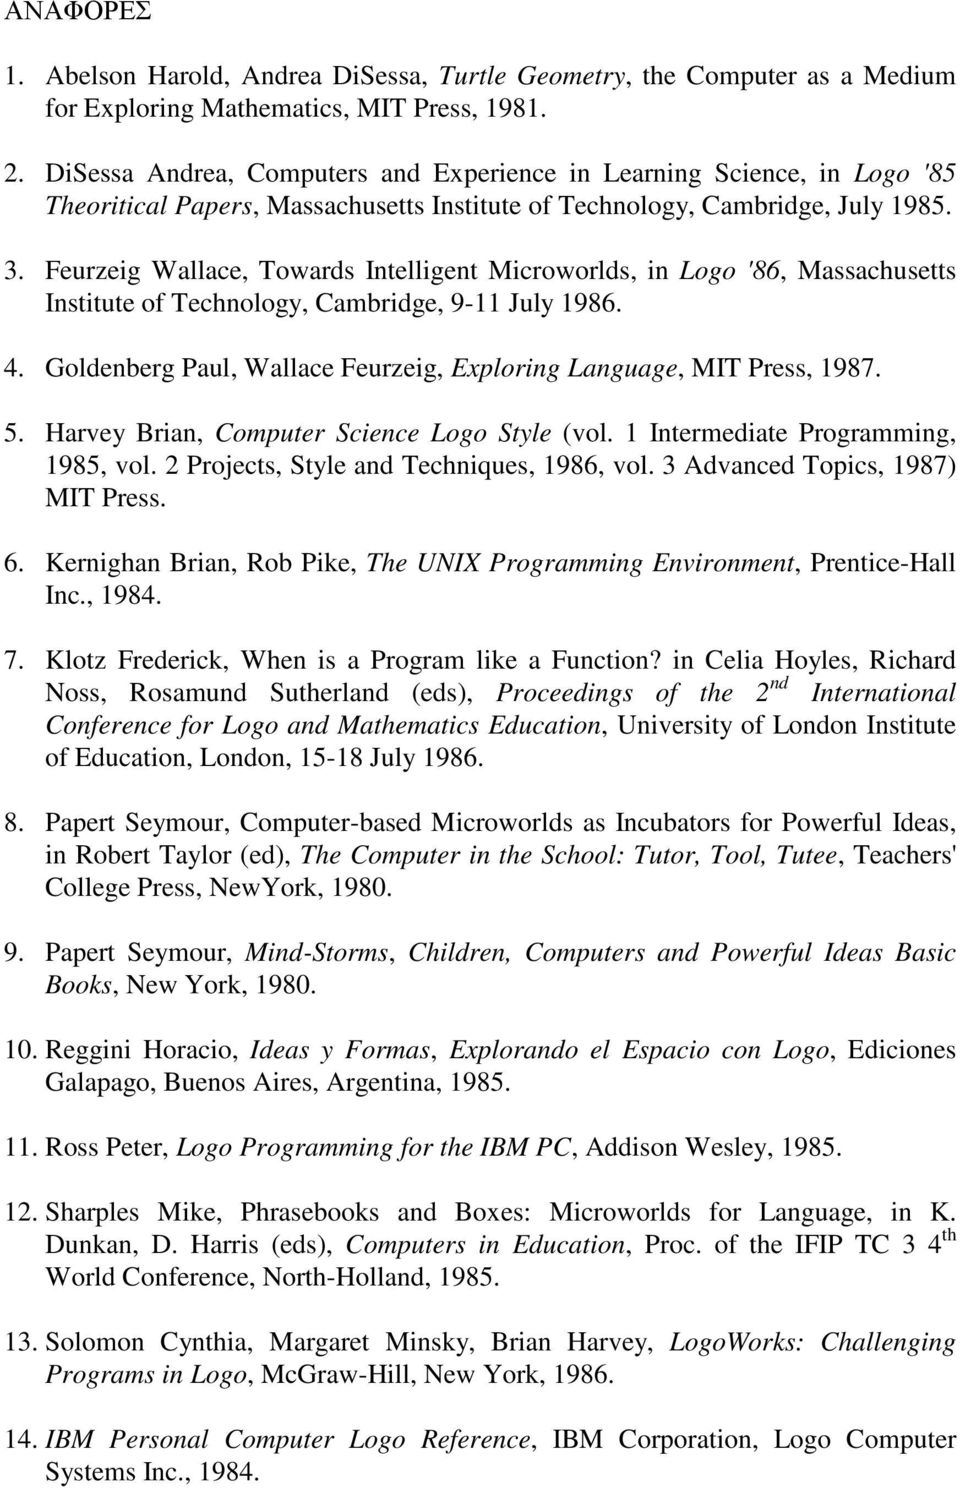 9-11 July 1986 4 Goldenberg Paul, Wallace Feurzeig, Exploring Language, MIT Press, 1987 5 Harvey Brian, Computer Science Logo Style (vol 1 Intermediate Programming, 1985, vol 2 Projects, Style and